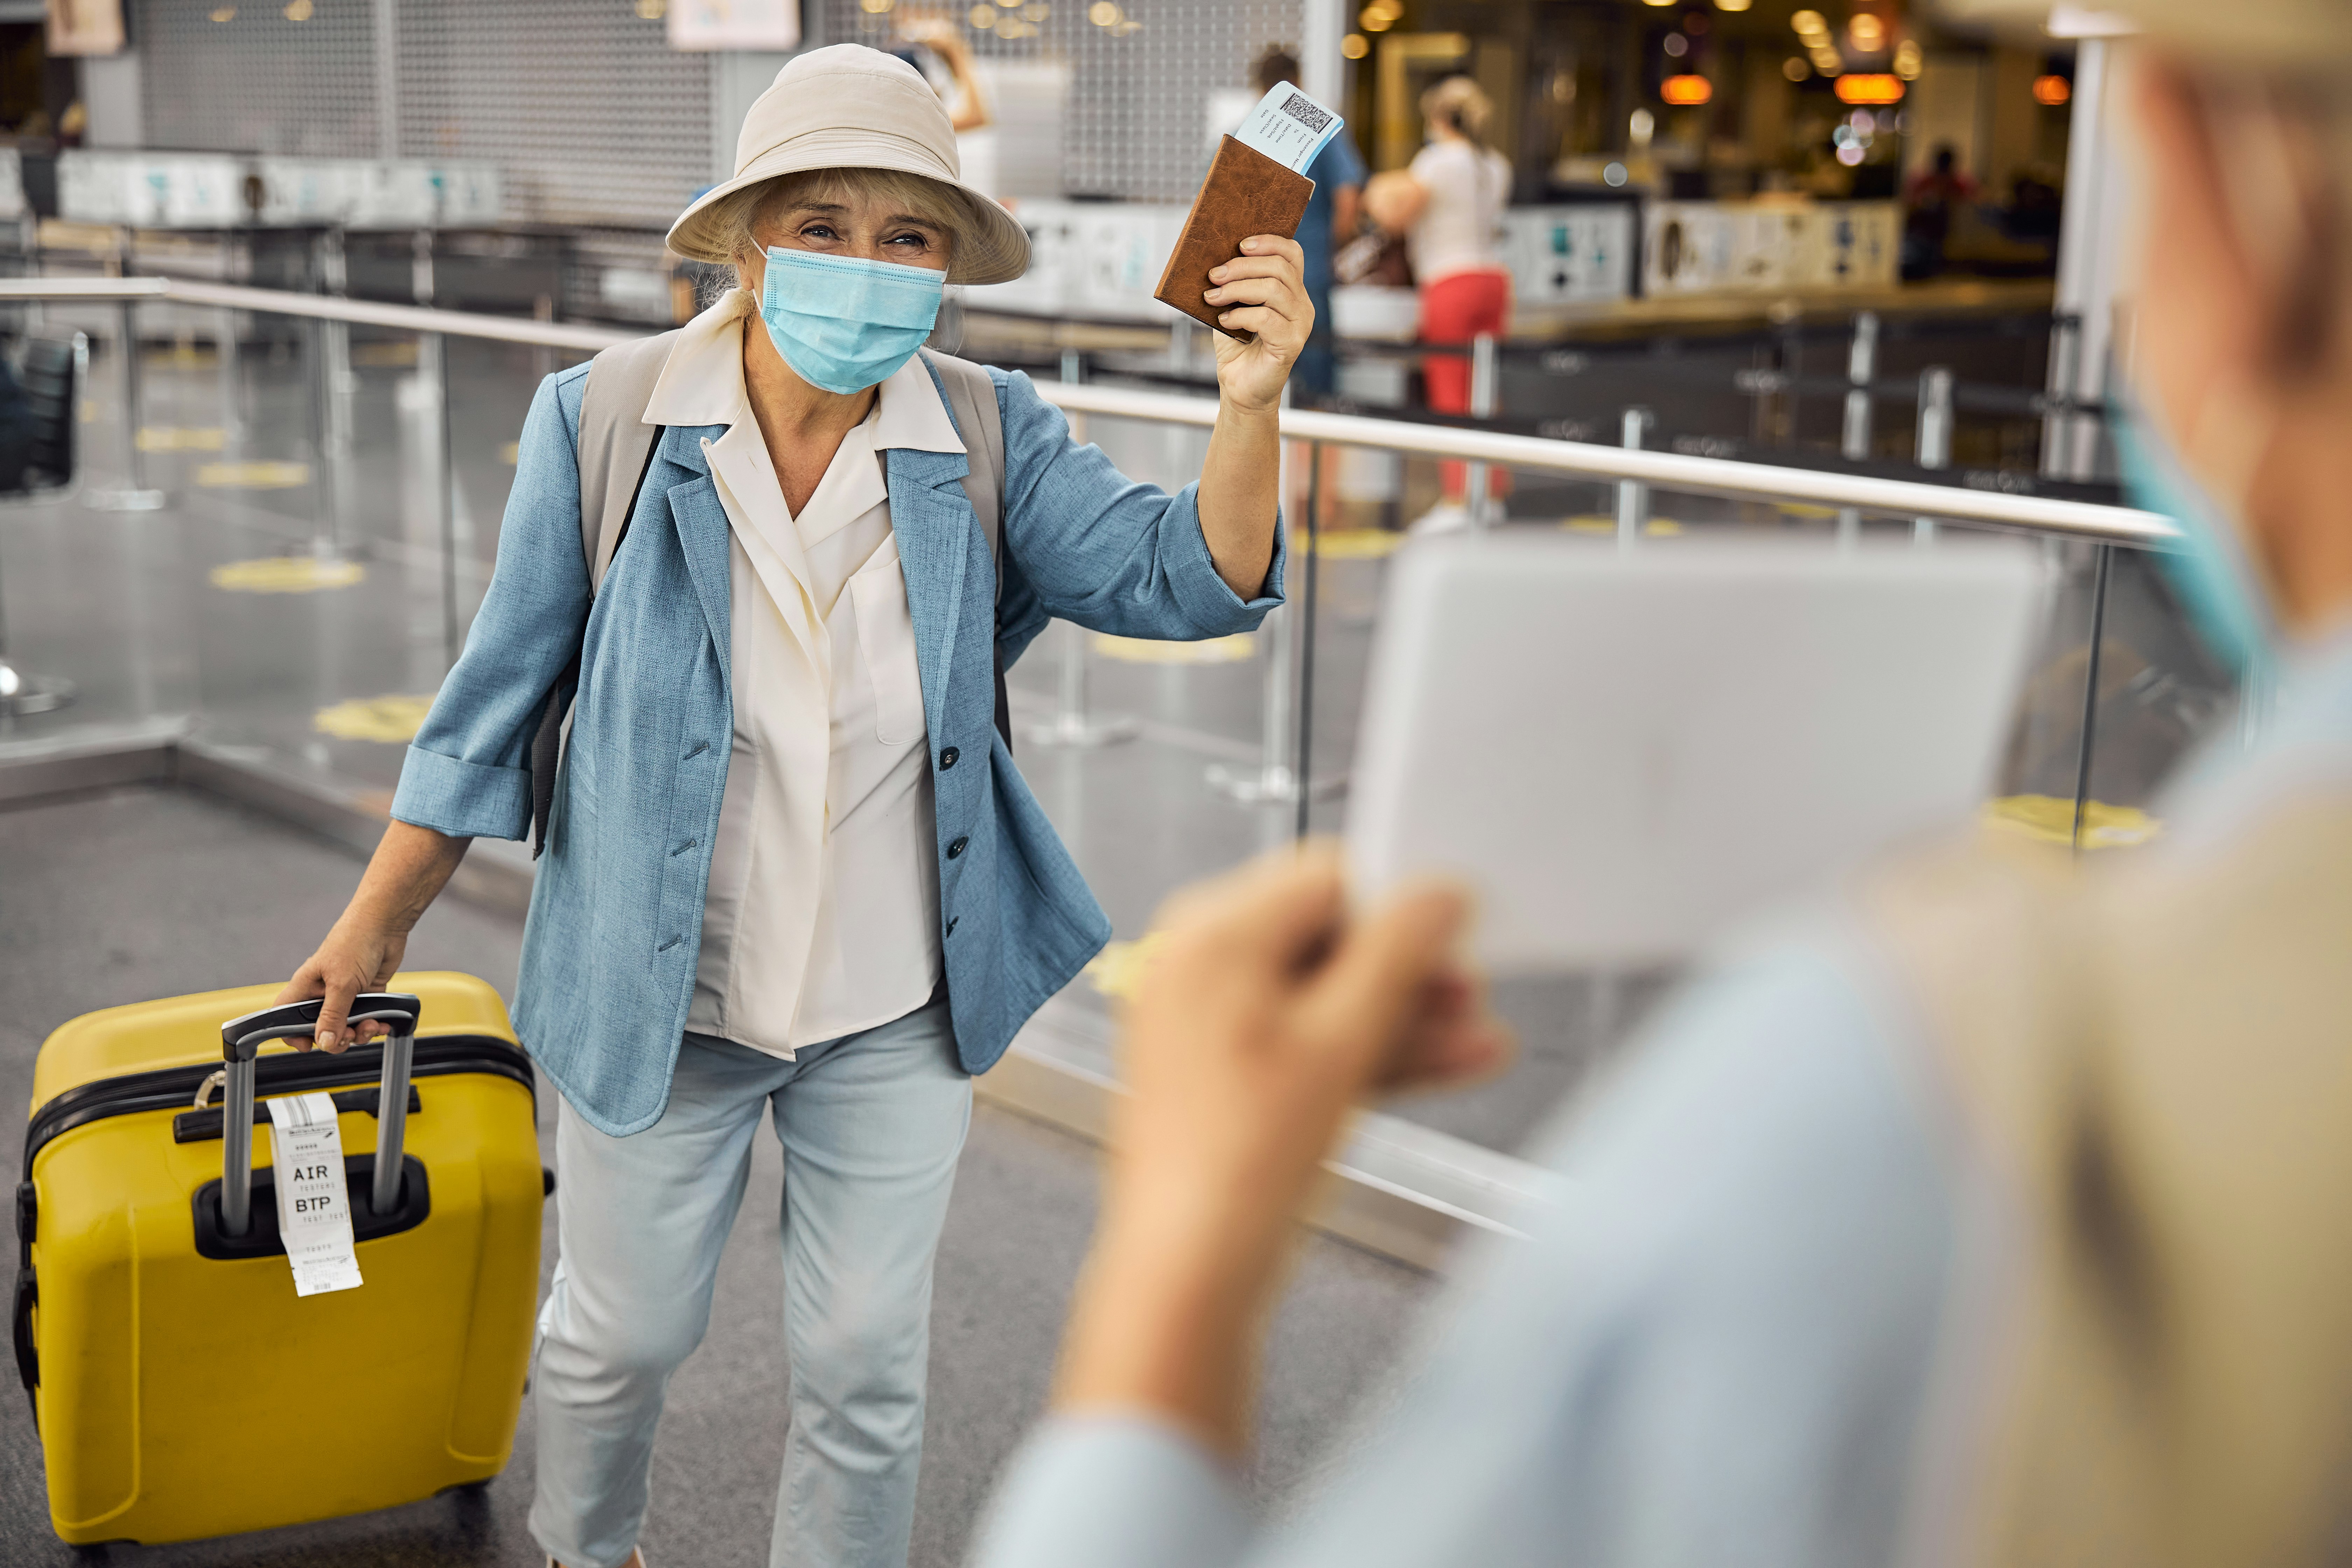 Newly arrived female passenger in a face mask walking towards a man with a sign